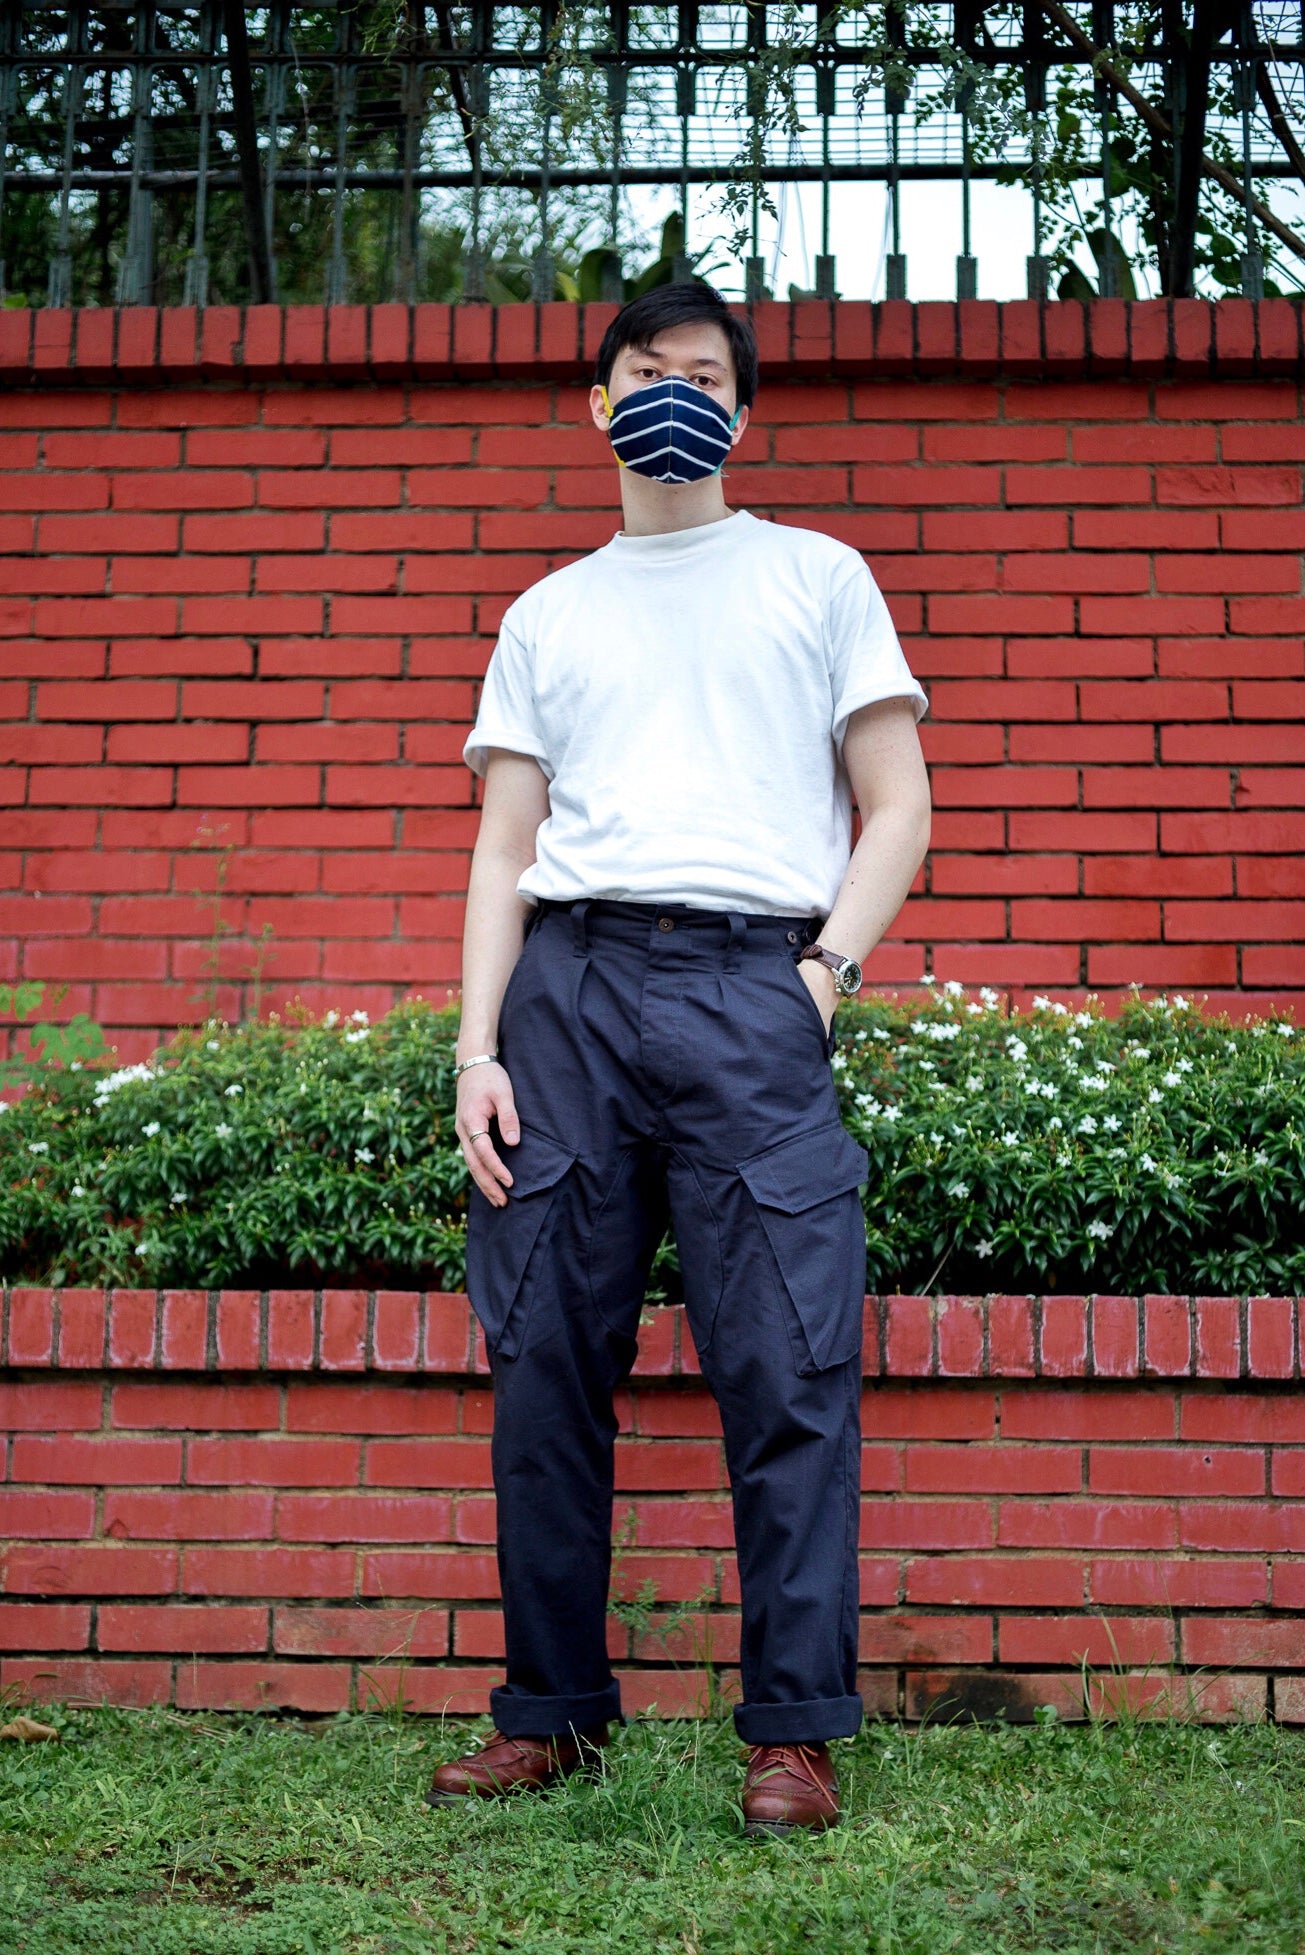 LD Navy Jungle Trousers in 10 oz. Ripstop